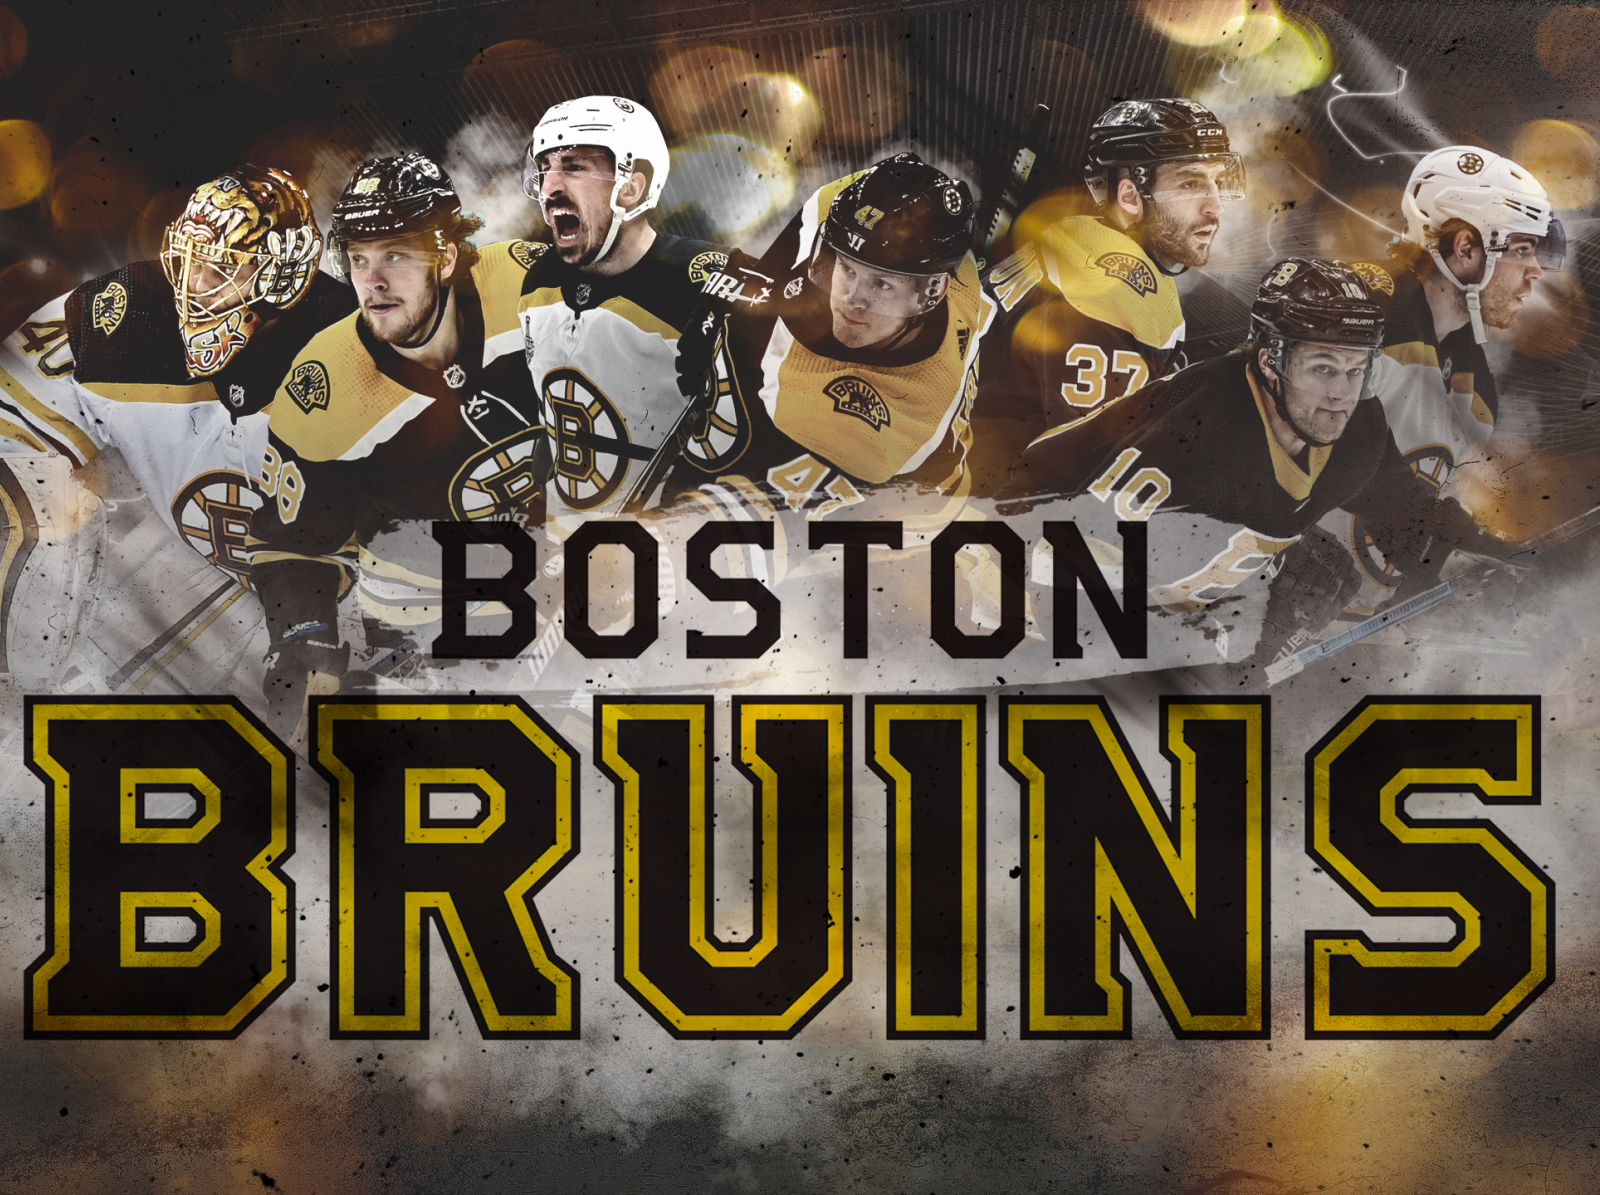 300+] Boston Bruins Pictures